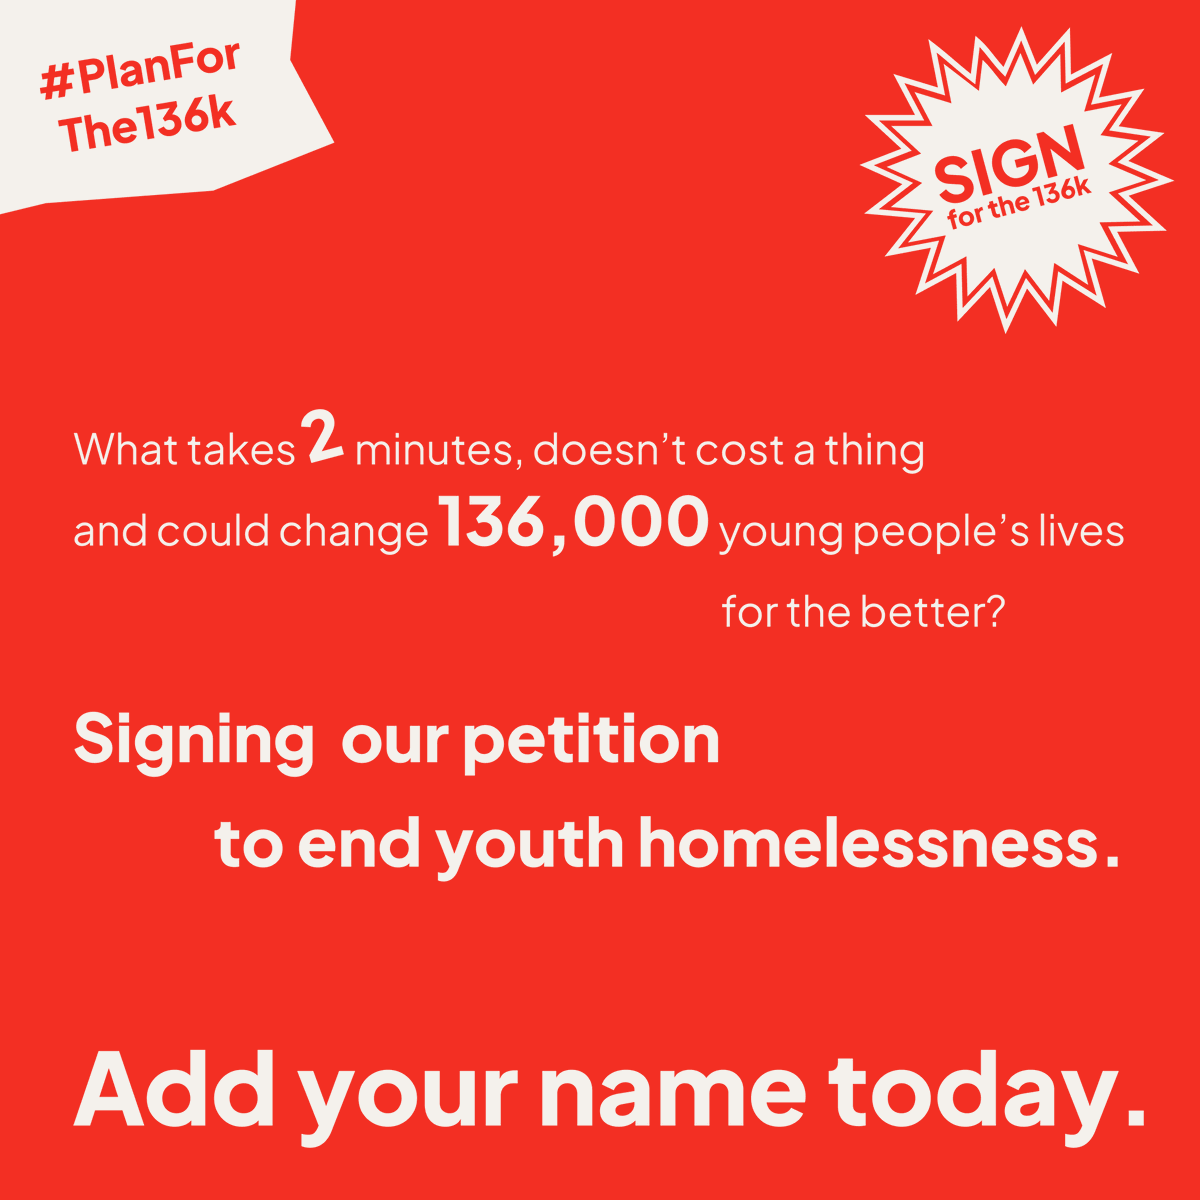 One homeless young person in the UK is terrible; 136,000 is unacceptable.

We’re calling on @govuk to create a national strategy to end youth homelessness.

Sign our petition today to end youth homelessness for good bit.ly/petition136k

#SignForThe136k #PlanForThe136k